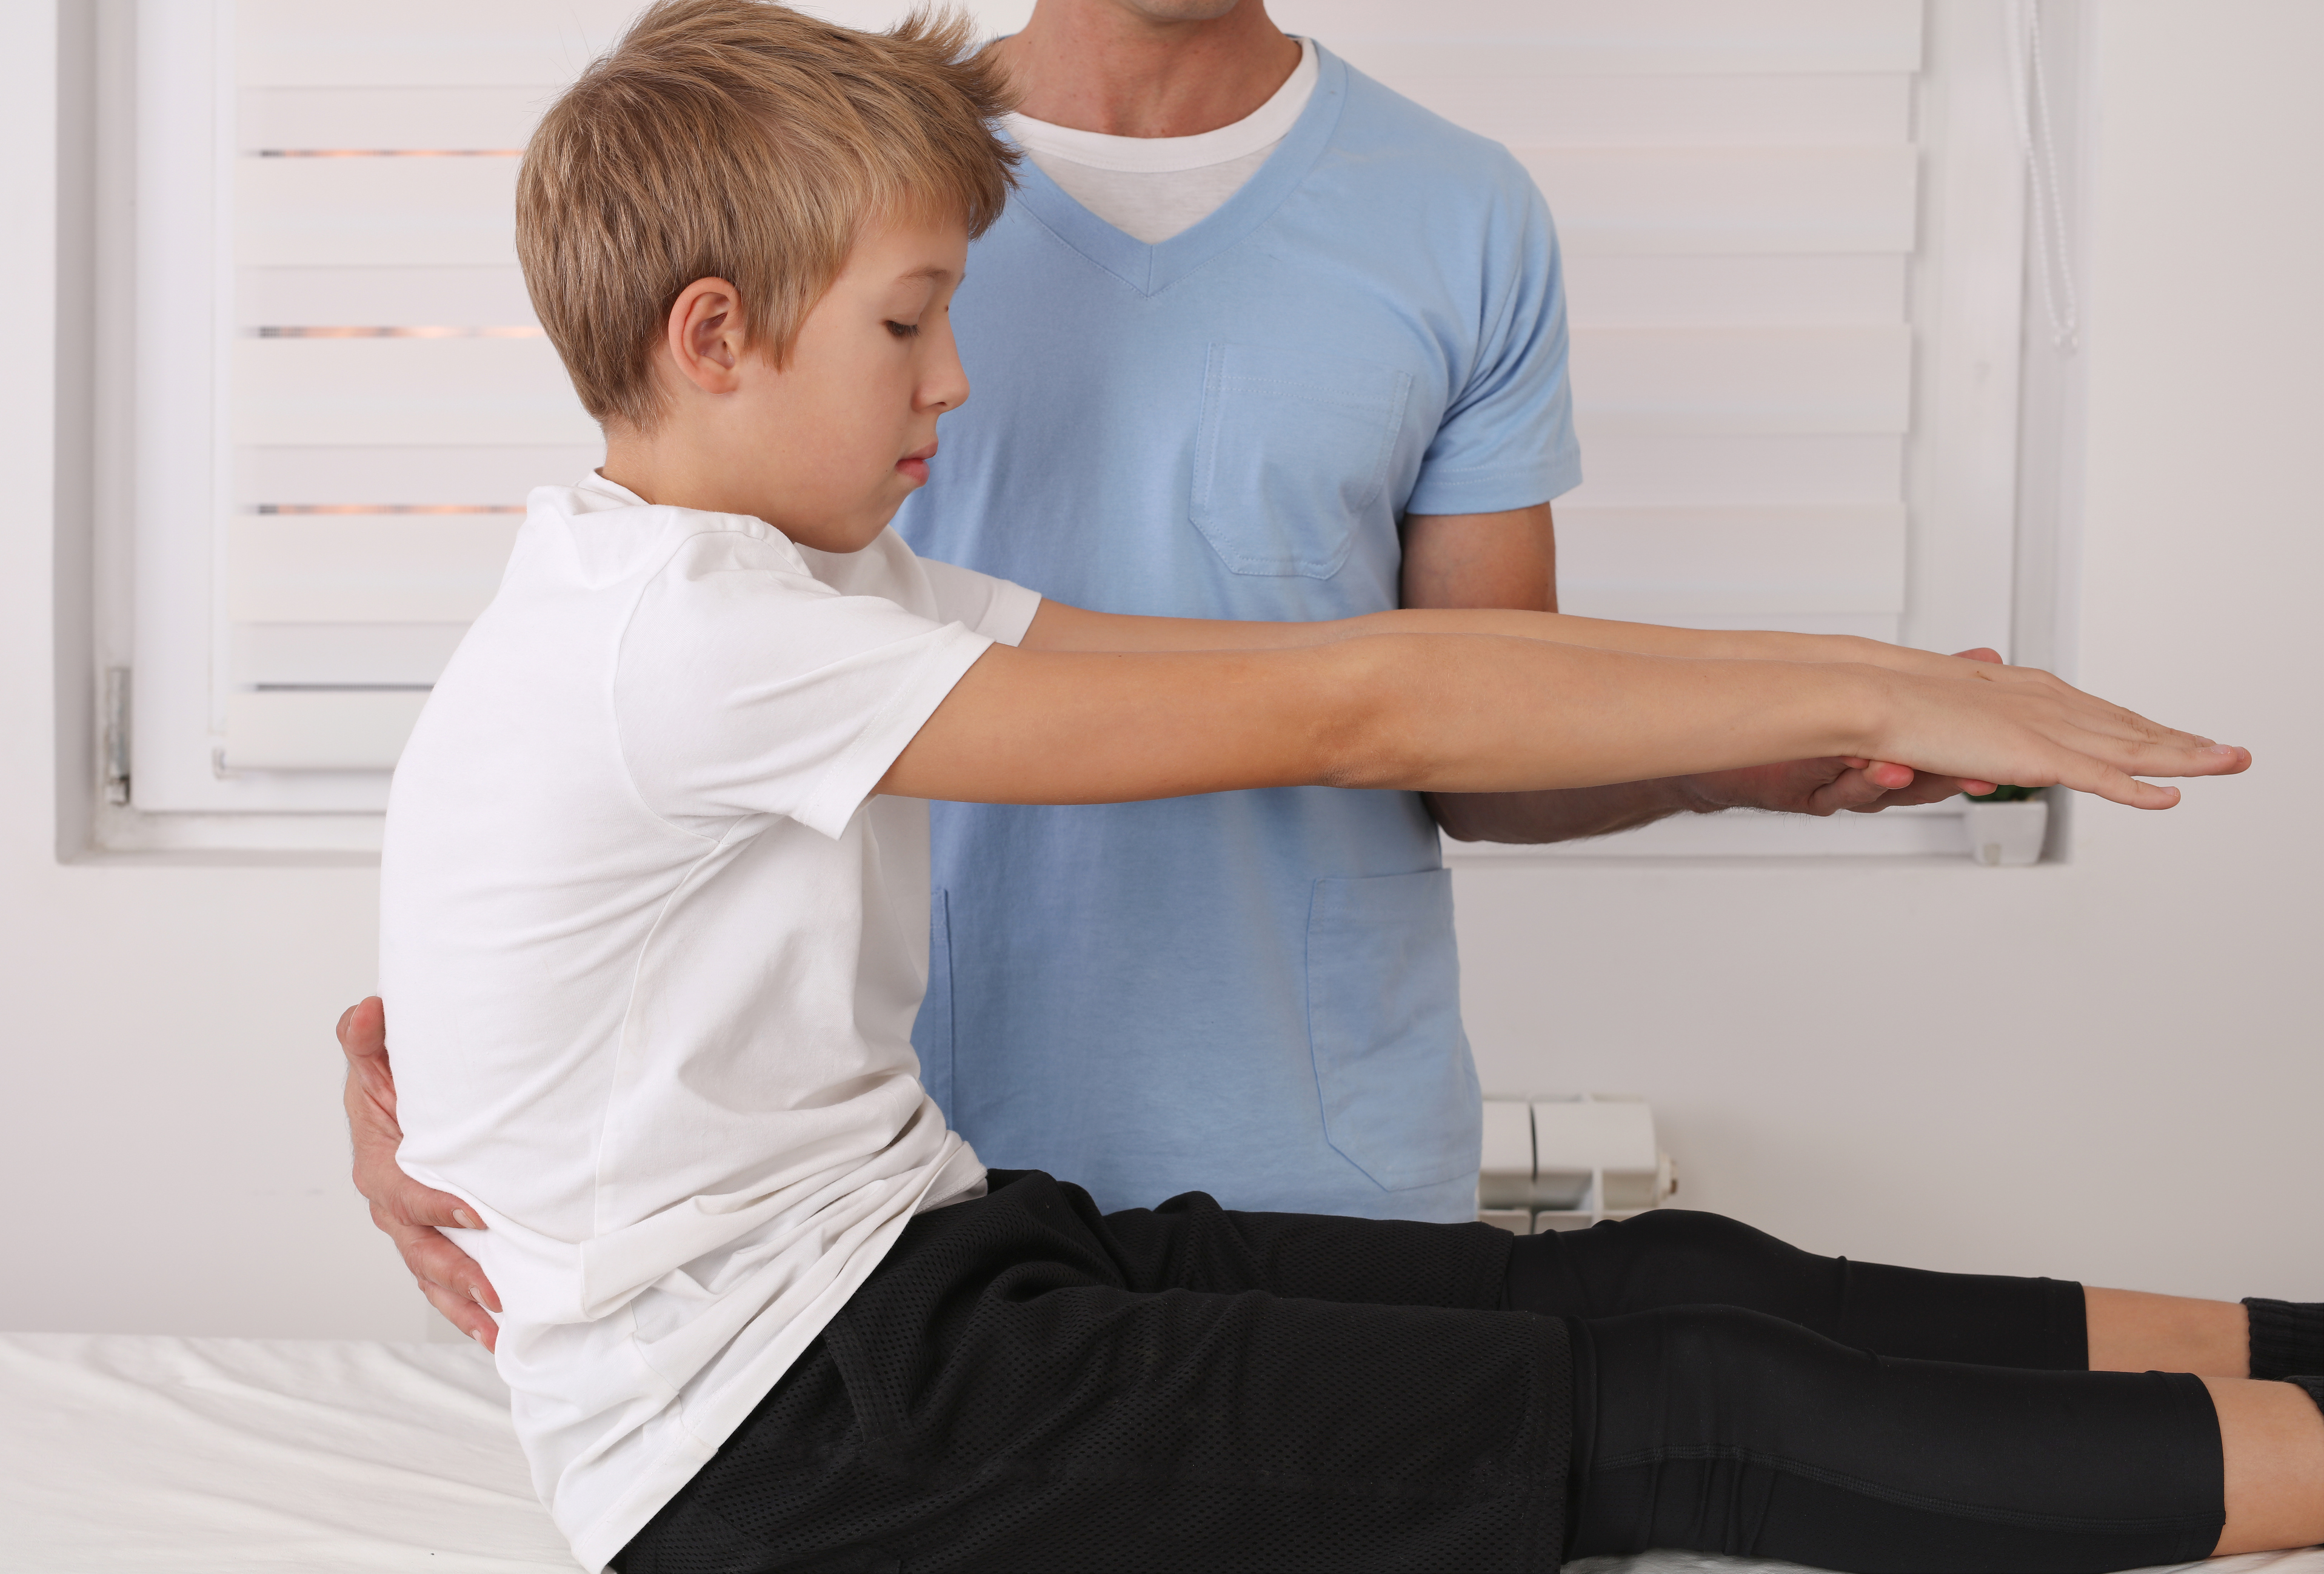 Balance Pad Exercises  Pain Science Physical Therapy 